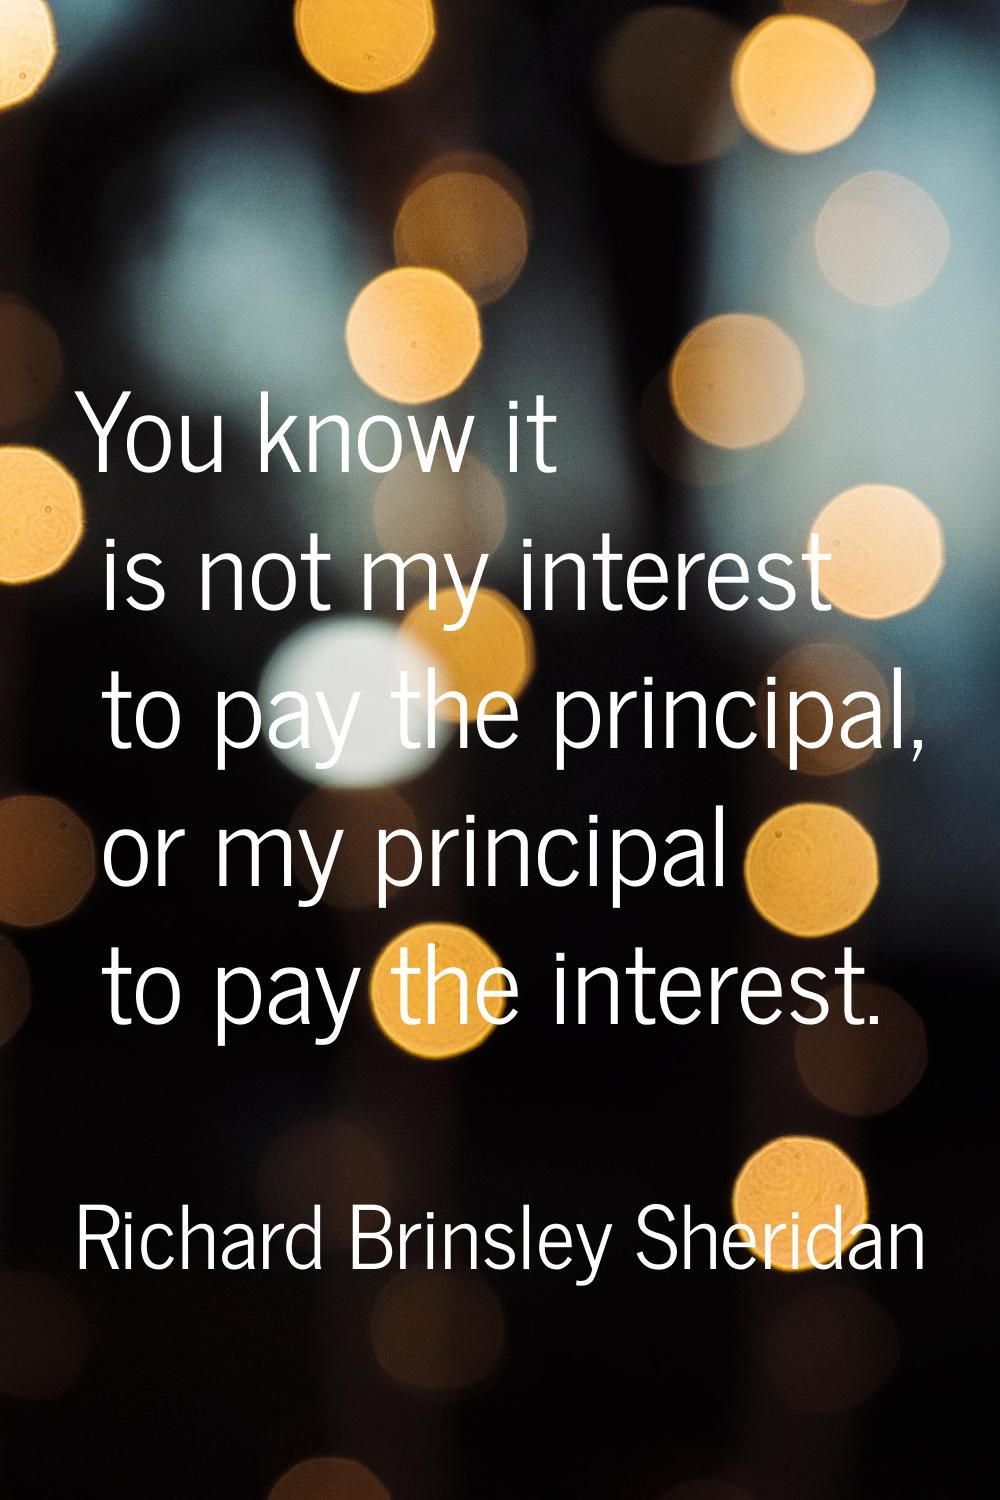 You know it is not my interest to pay the principal, or my principal to pay the interest.